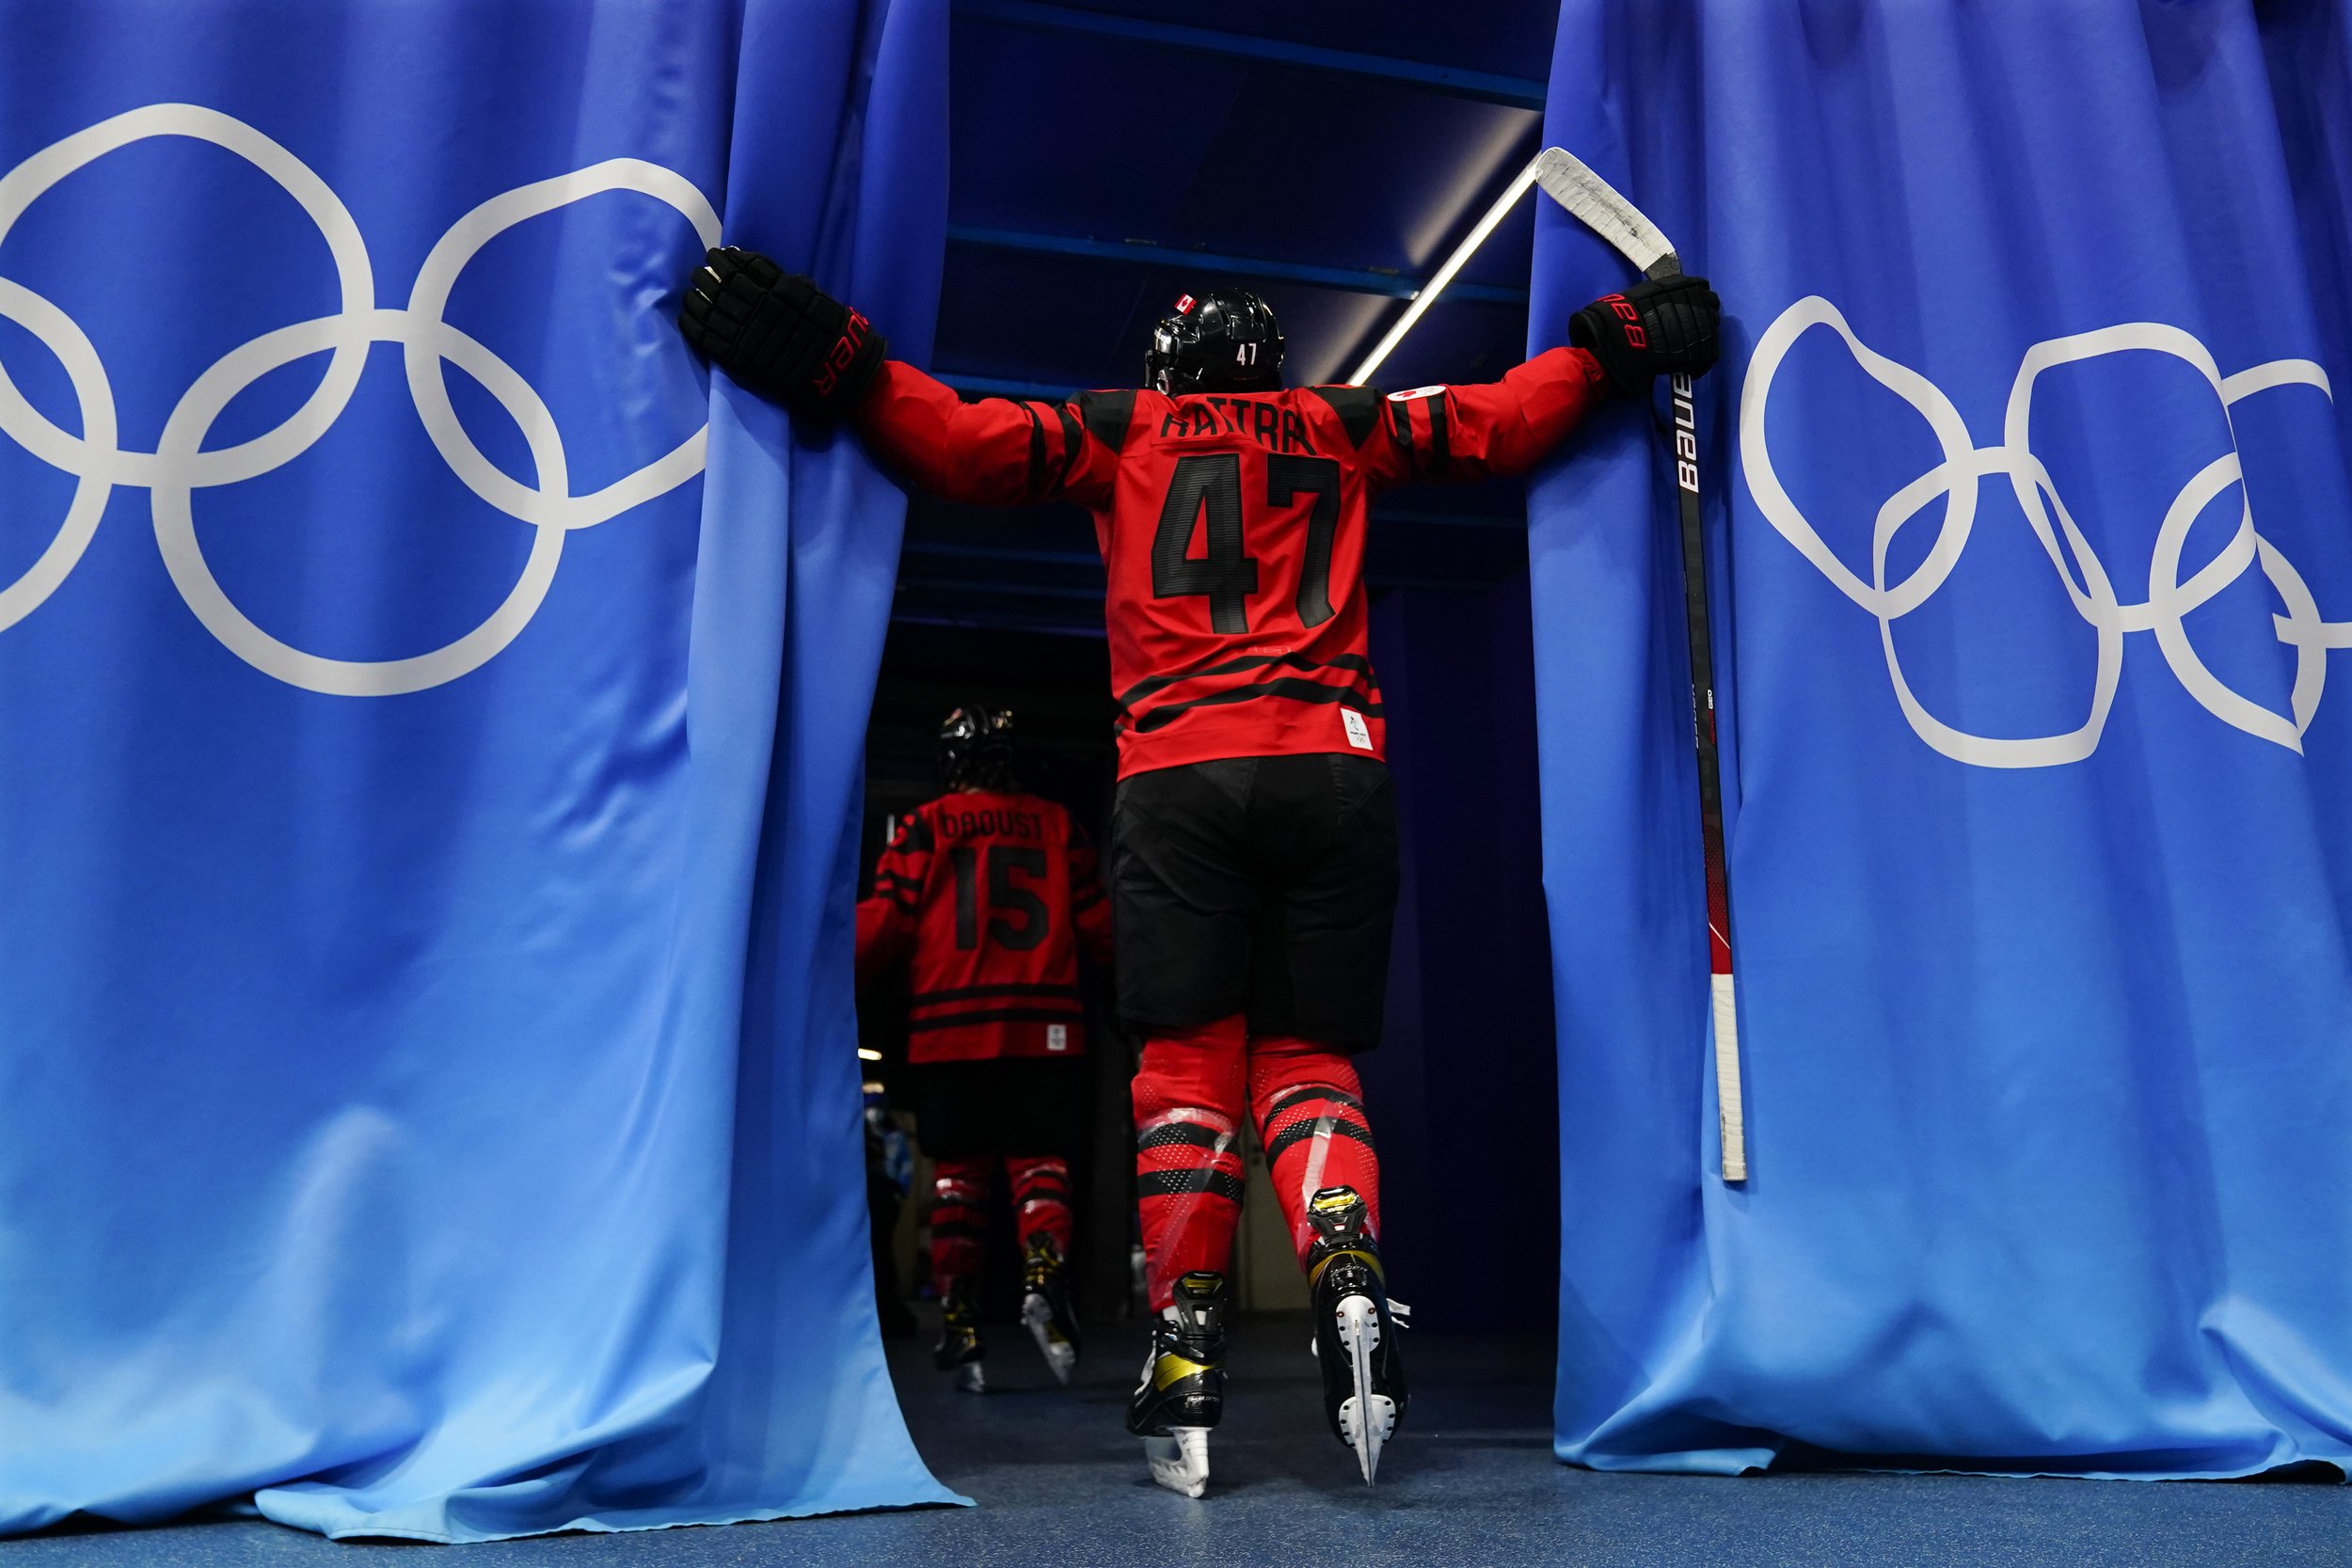  Canada's Jamie Lee Rattray (47) waits for the start of the women's gold medal hockey game against the United States at the 2022 Winter Olympics, Thursday, Feb. 17, 2022, in Beijing. (AP Photo/Matt Slocum) 